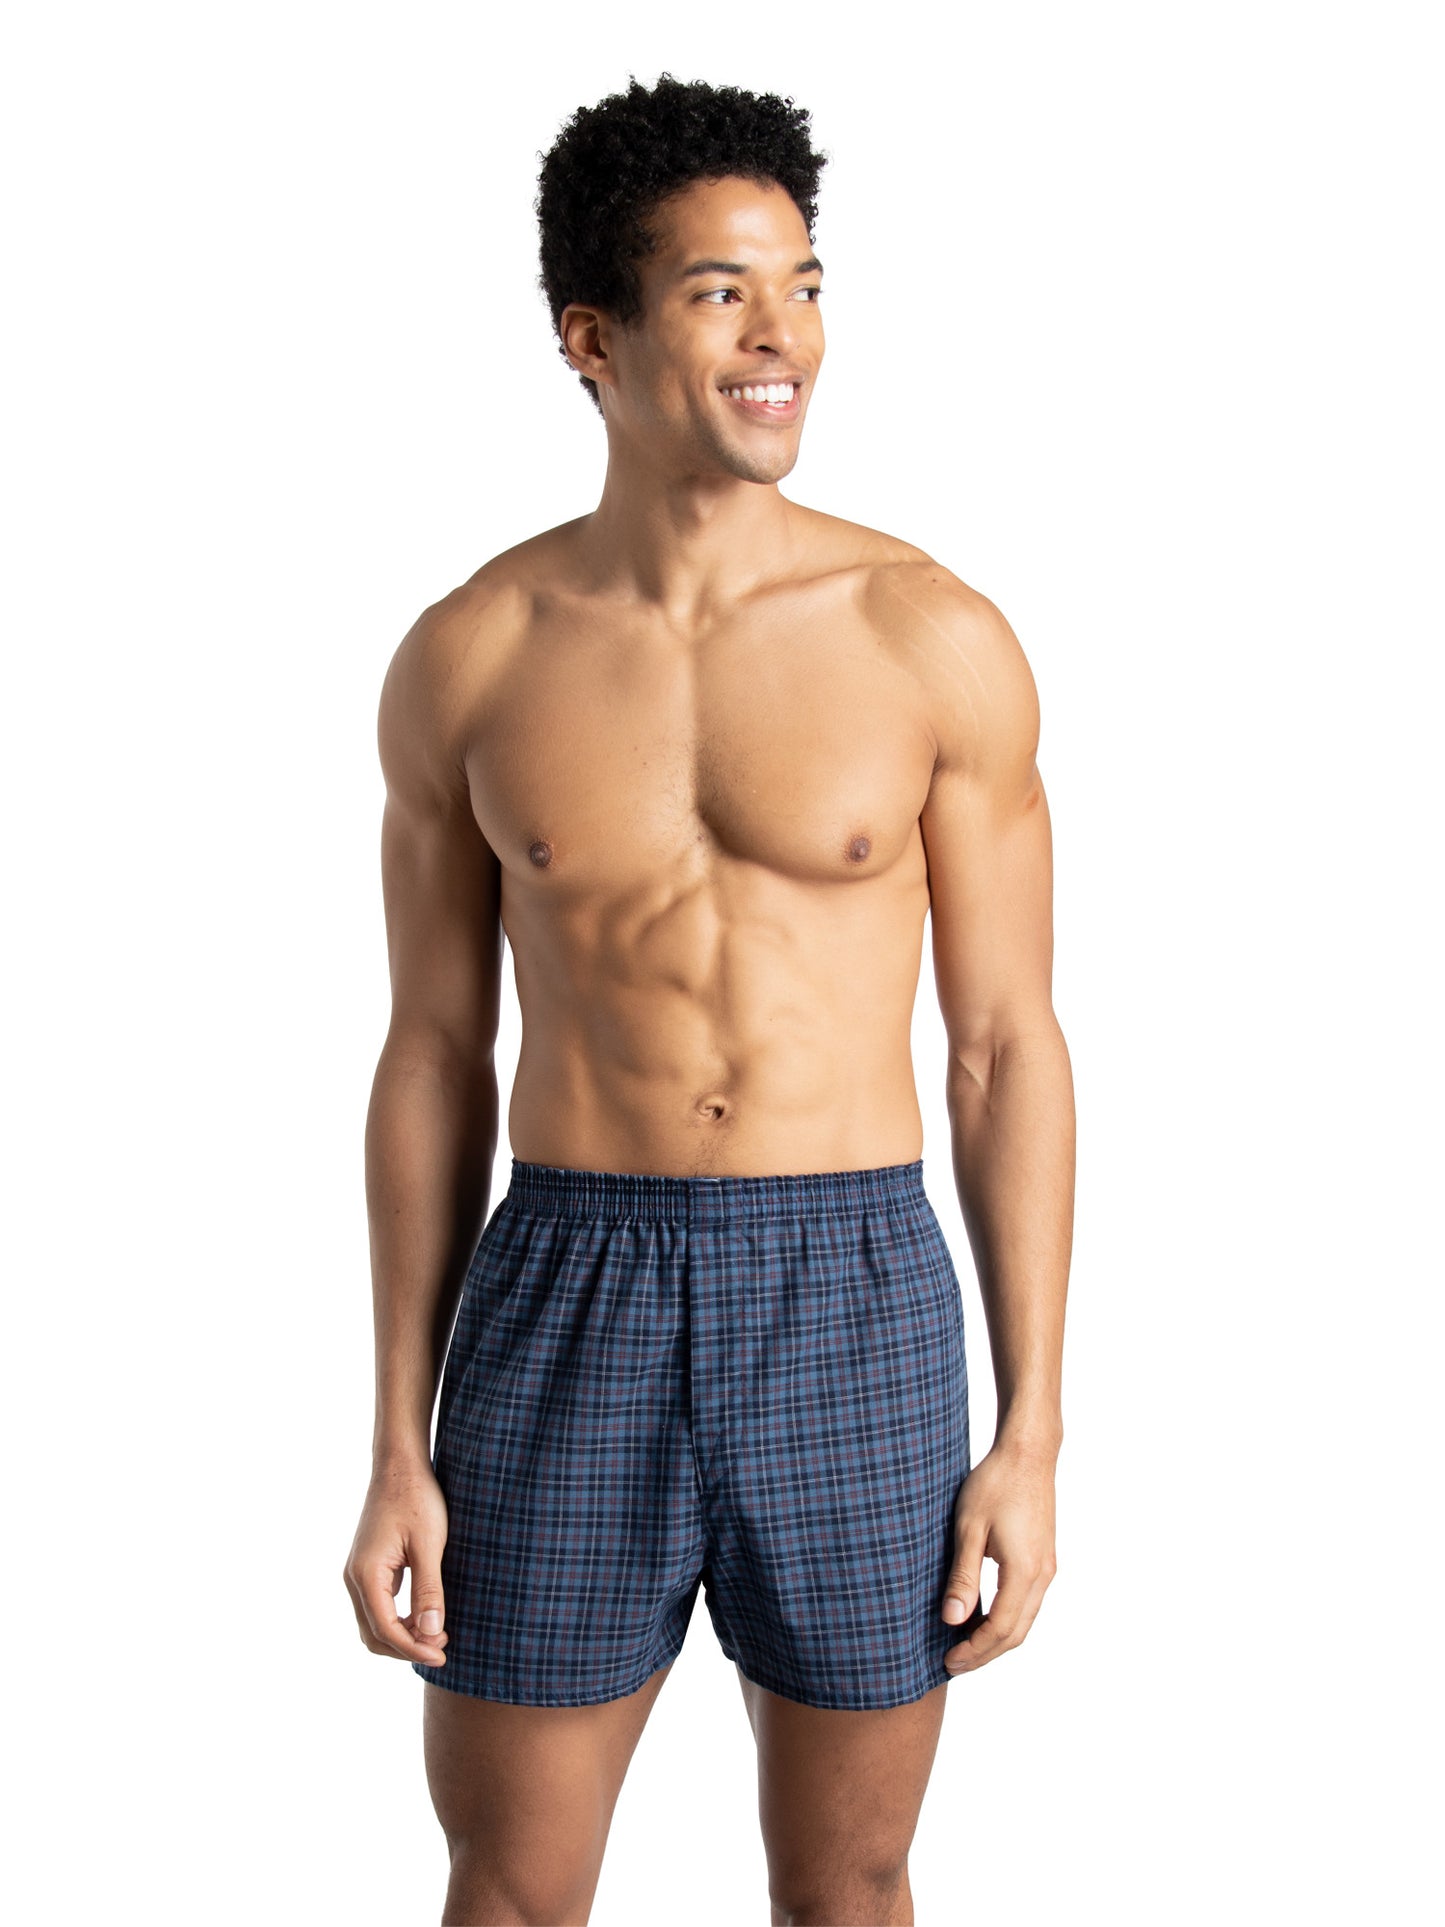 Fruit of the Loom Men's Woven Boxers, 6 Pack